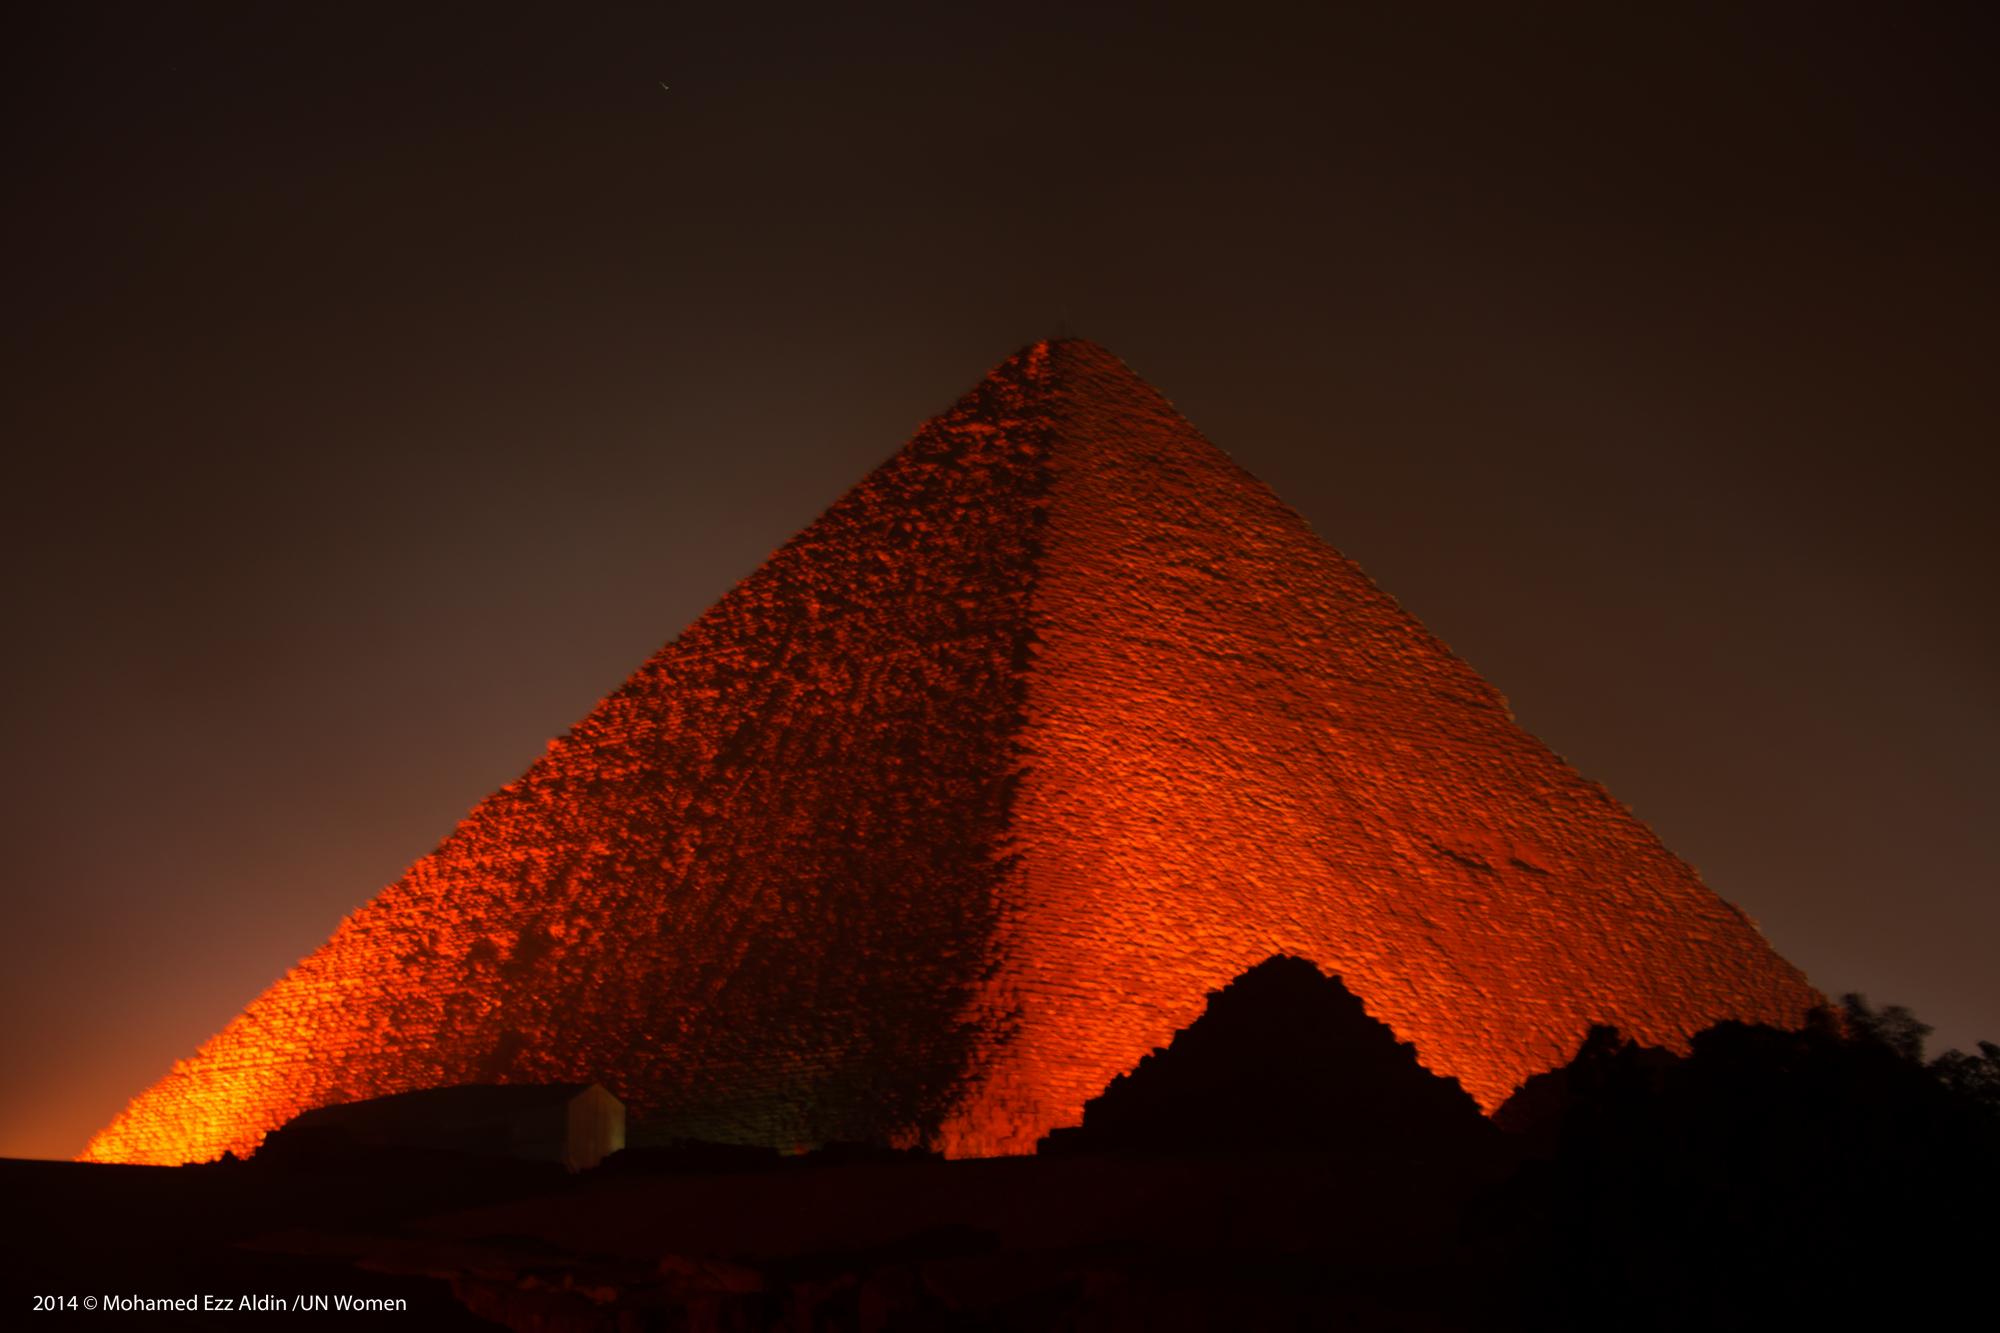 The Great Pyramid was illuminated in orange as part of the "Orange the World" campaign for last year's International Day for the Elimination of Violence against Women